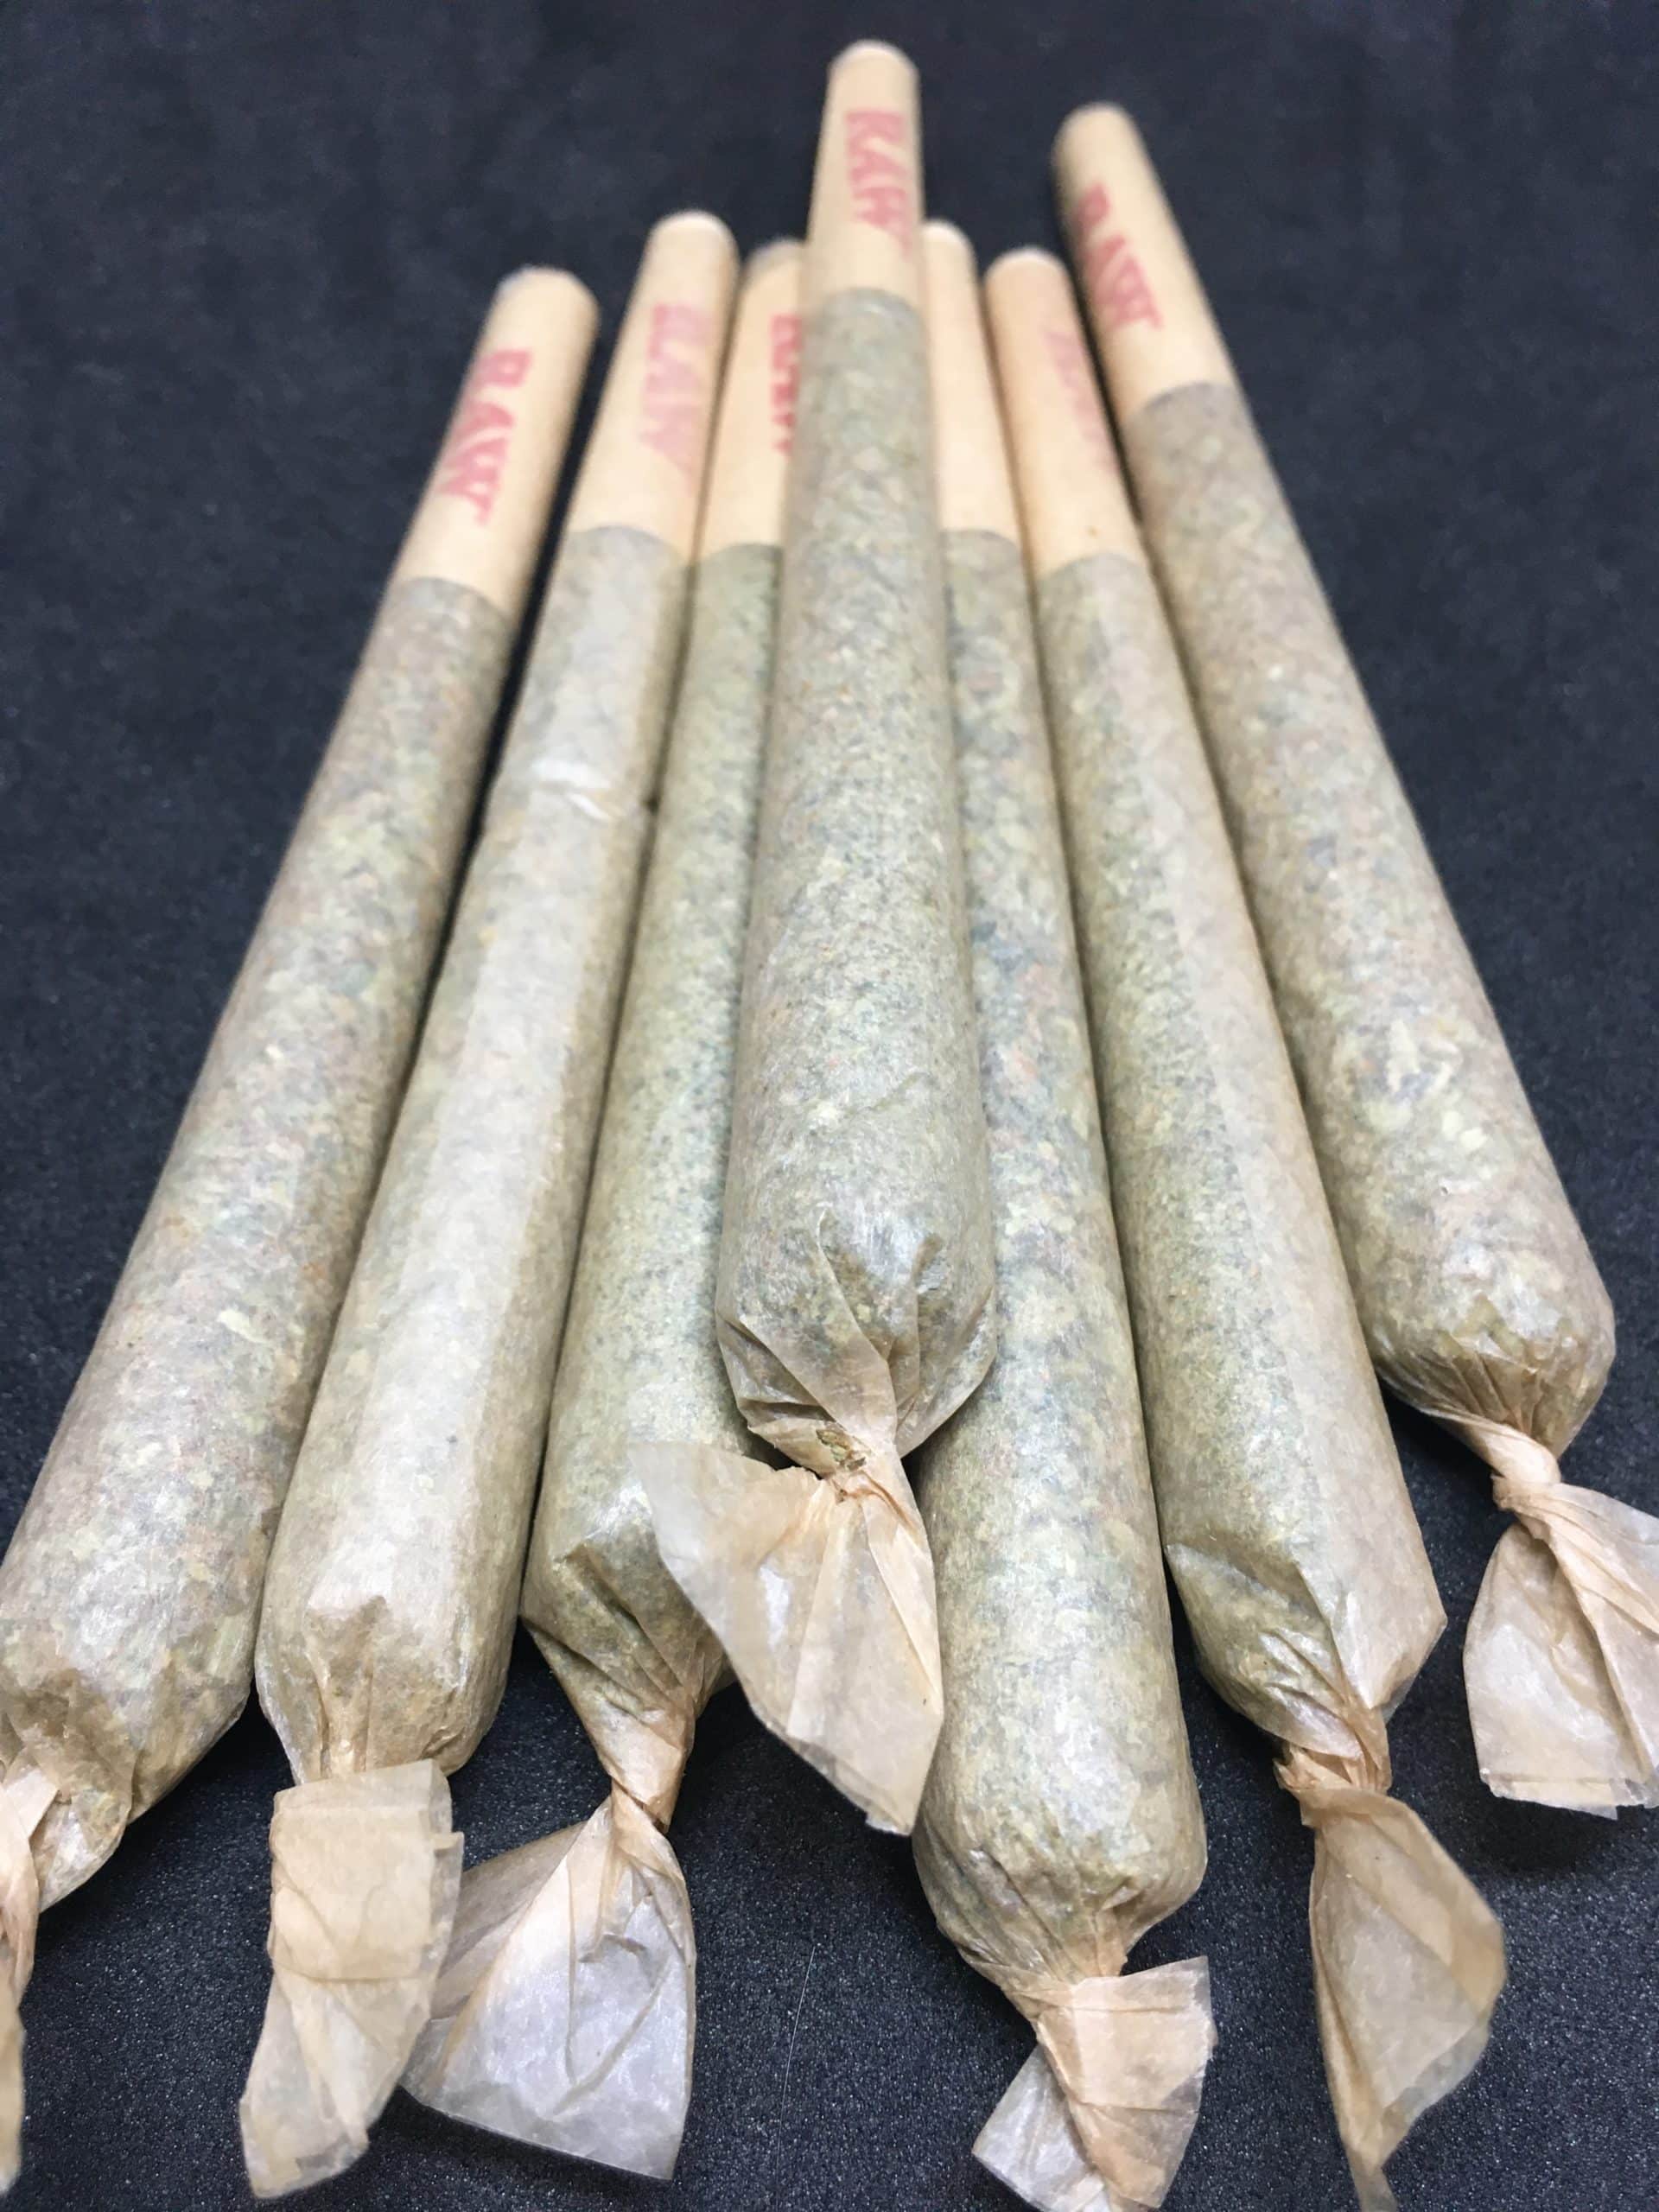 preroll scaled - St. Patrick's Day Weed Delivery Toronto - Cannabis Delivery Toronto - Marijuana Delivery Toronto - Weed Edibles Delivery Toronto - Kush Delivery Toronto - Same Day Weed Delivery in Toronto - 24/7 Weed Delivery Toronto - Hash Delivery Toronto - We are Kind Flowers - Premium Cannabis Delivery in Toronto with over 200 menu items. We’re an experienced weed delivery in Toronto and we deliver all orders in a smell-proof, discreet package straight to your door. Proudly Canadian and happy to always serve you. We offer same day weed delivery toronto, cannabis delivery toronto, kush delivery toronto, edibles weed delivery toronto, hash delivery toronto, 24/7 weed delivery toronto, weed online delivery toronto